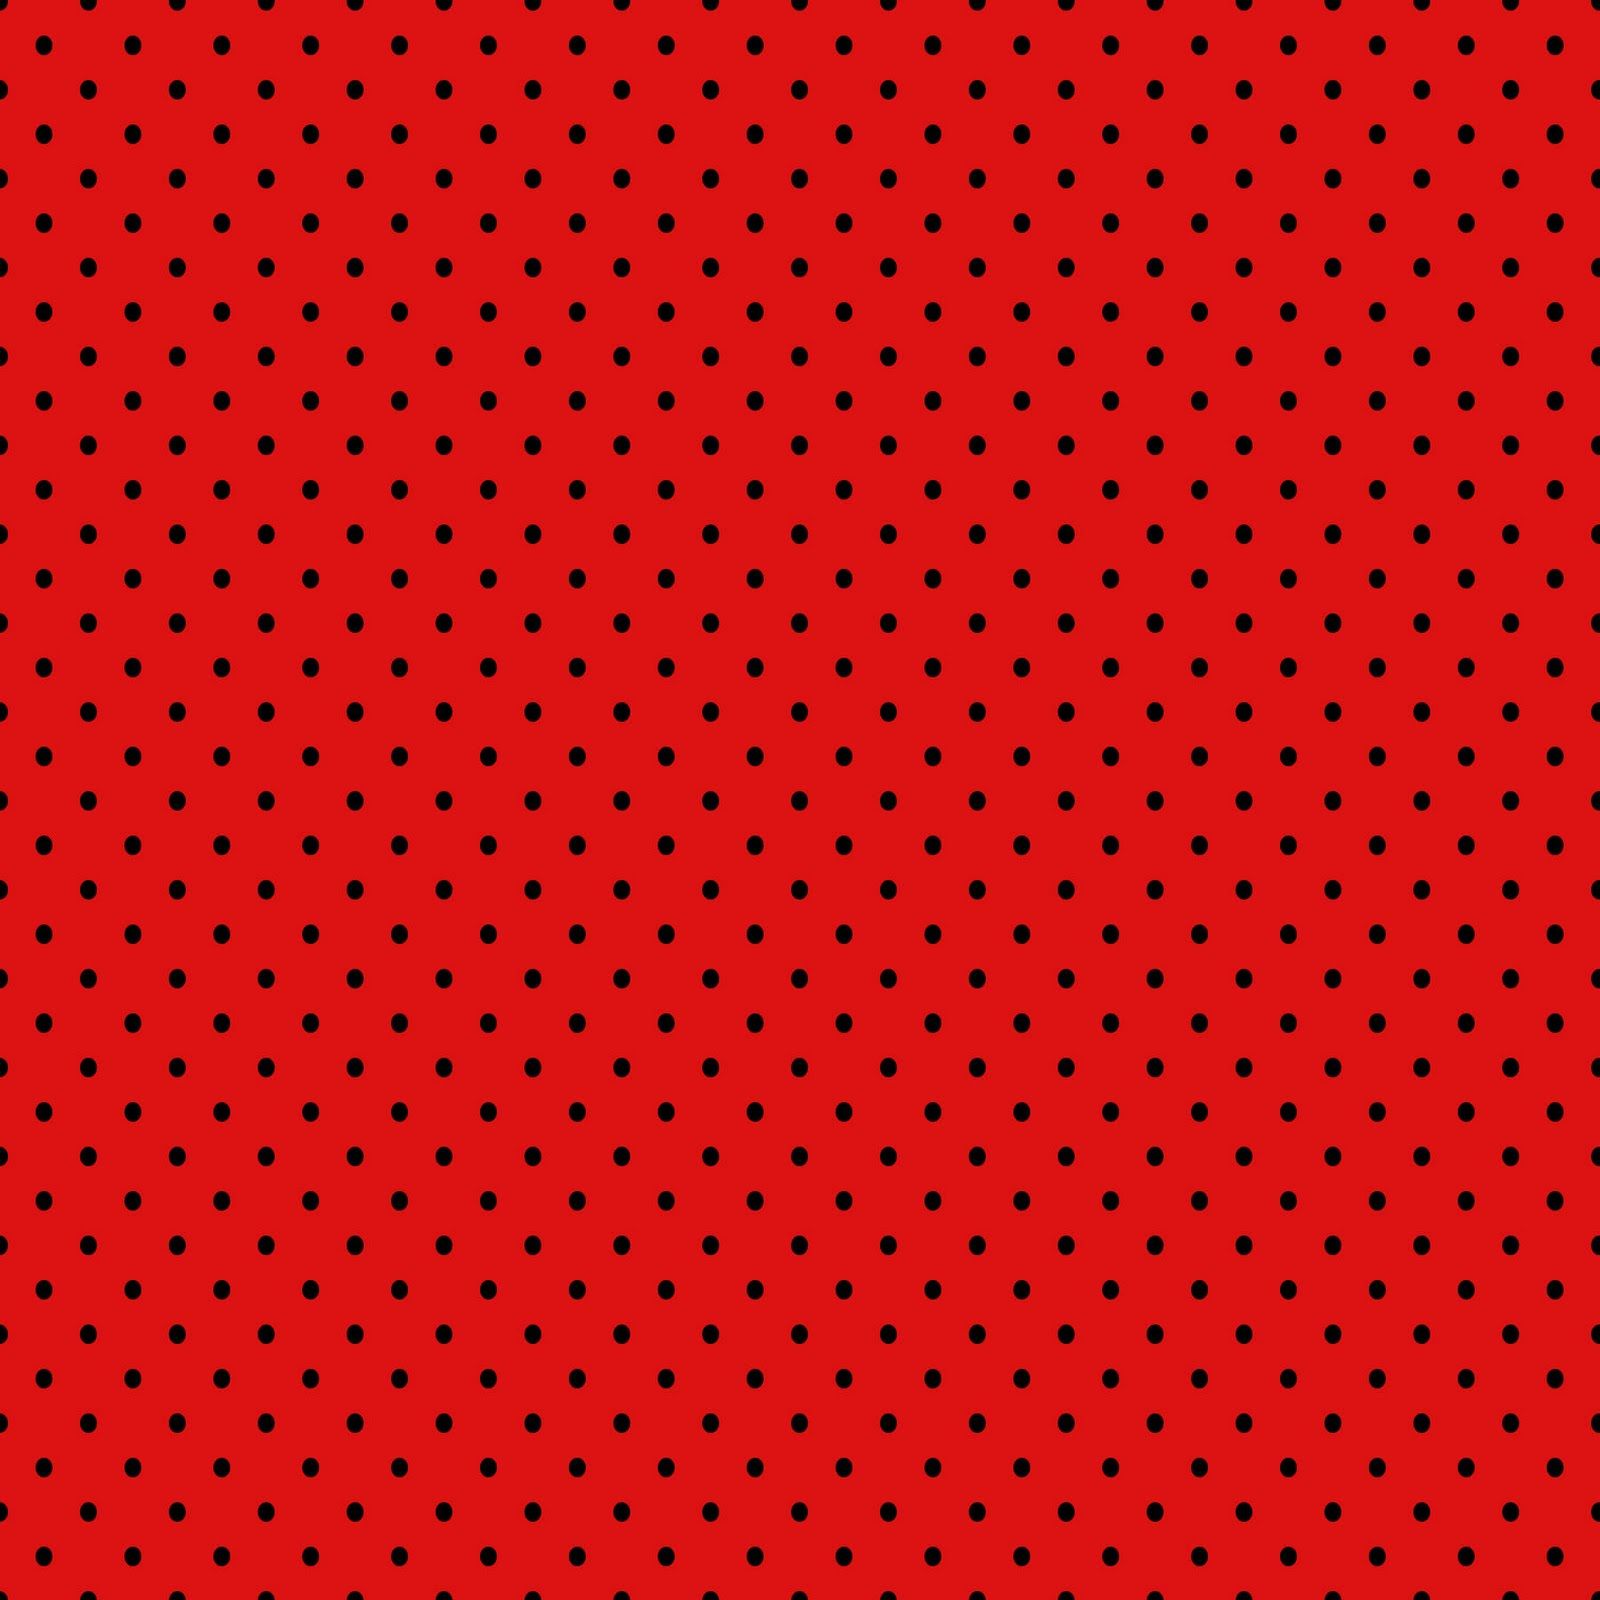 Mini Black Polka Dots on Red from Free Vintage Digital Stamps ...